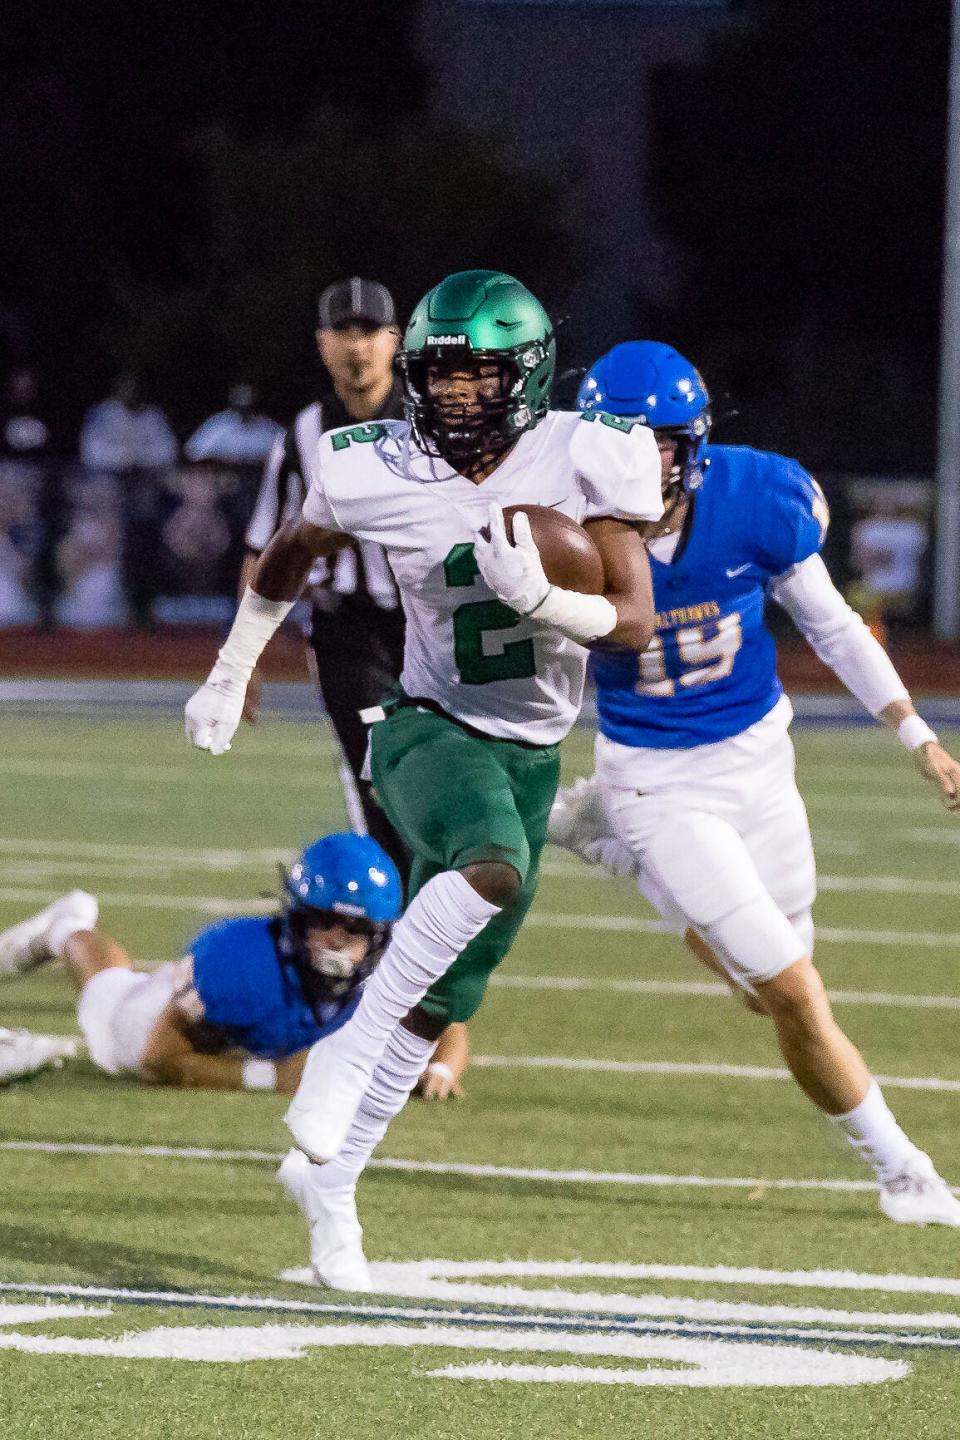 Derby High School running back Dylan Edwards (2) announced Friday that he is decommitting from Kansas State and reopening his recruitment.